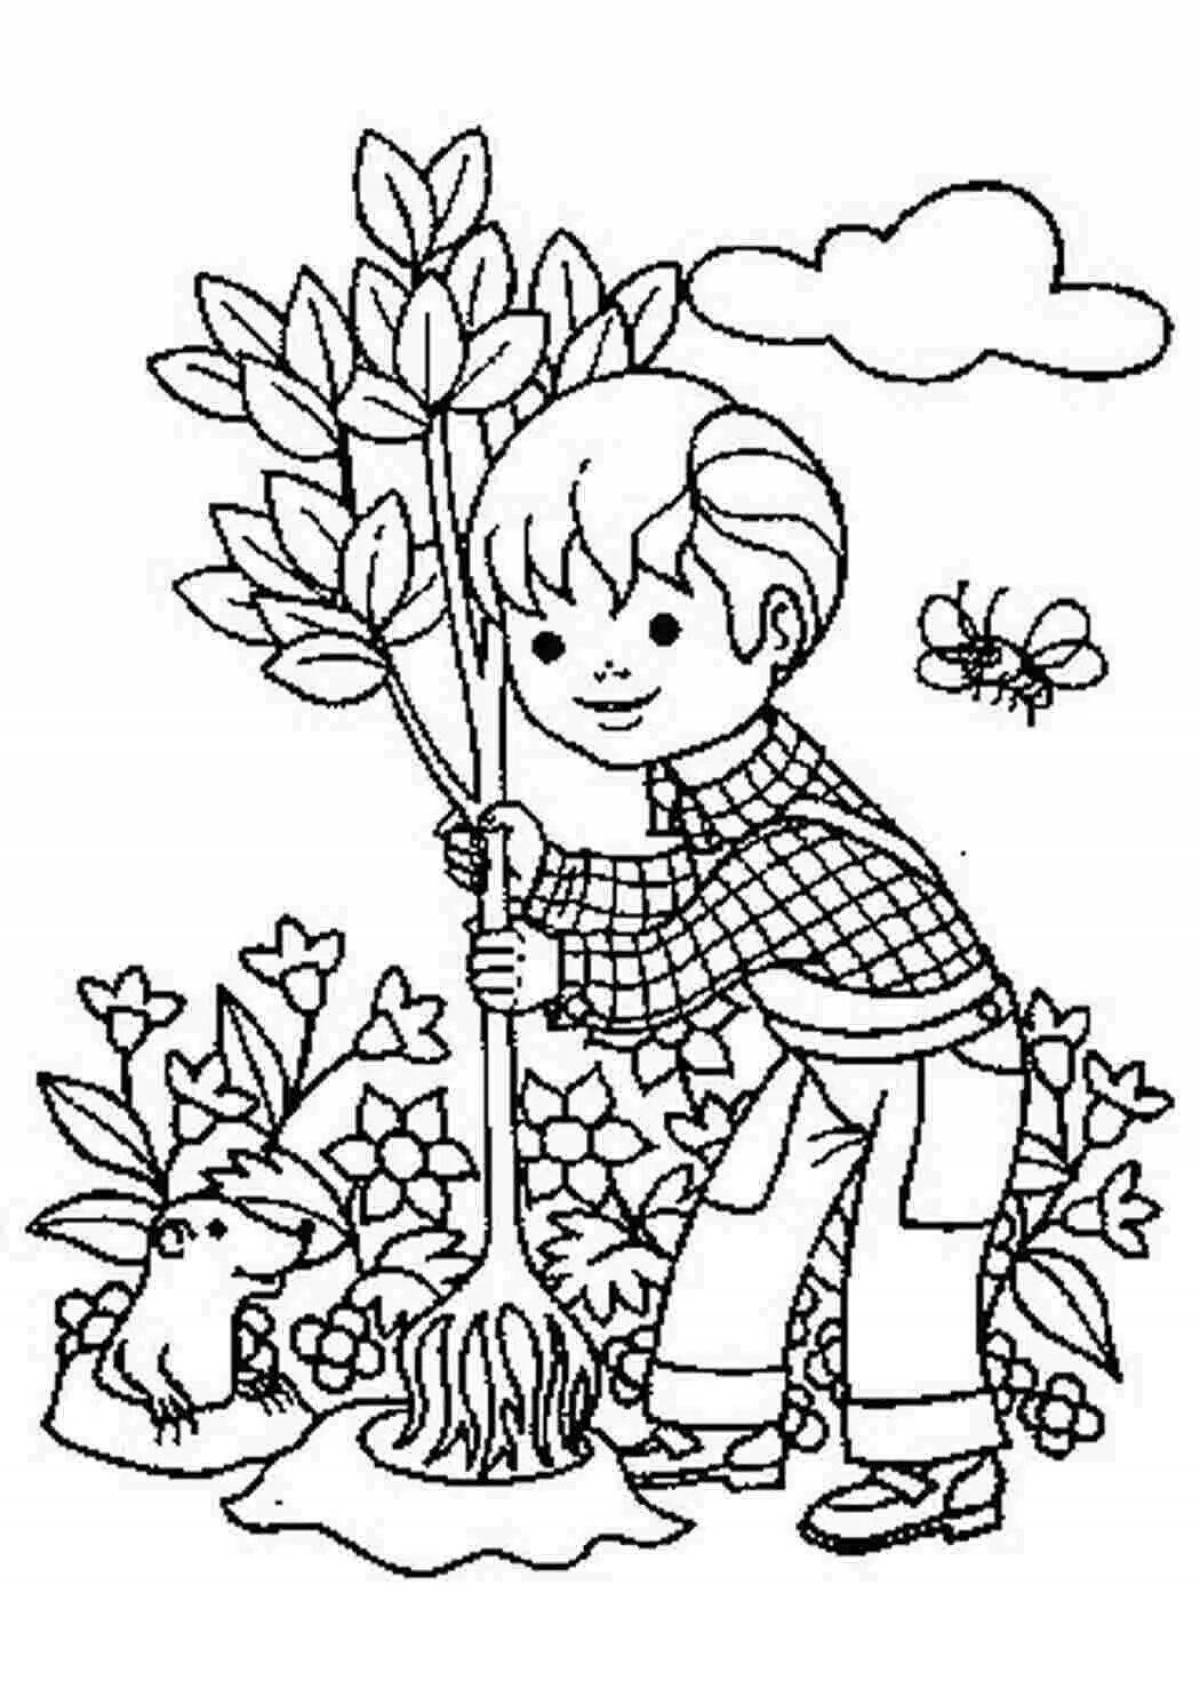 Colorful eco coloring book for kids